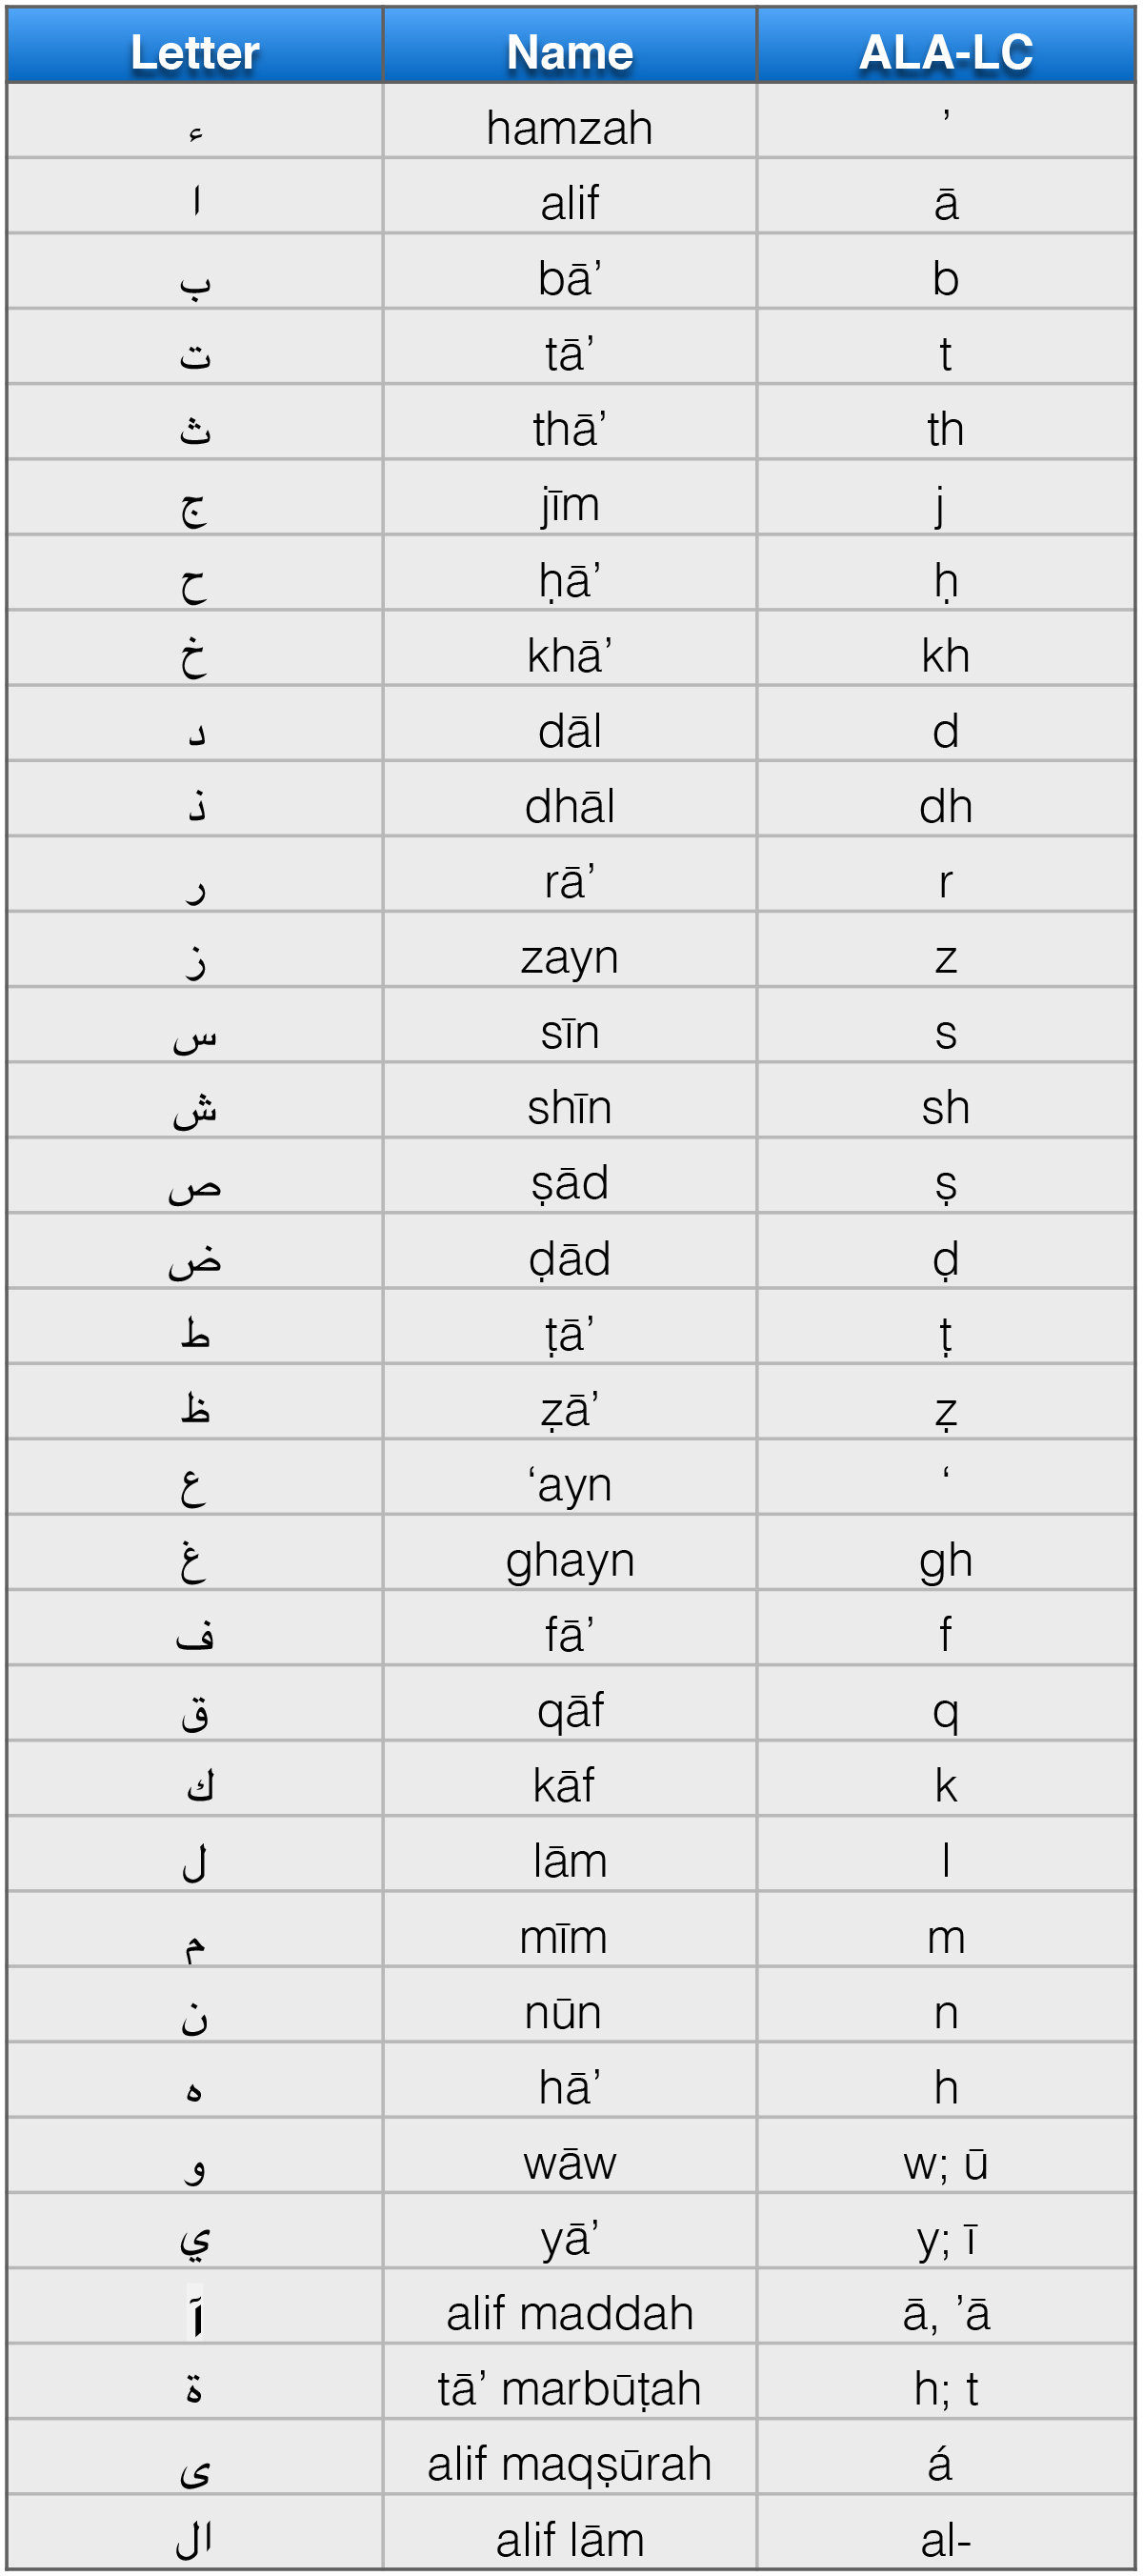 Chart of the ALA Library of Congress Transliteration System used in this book.